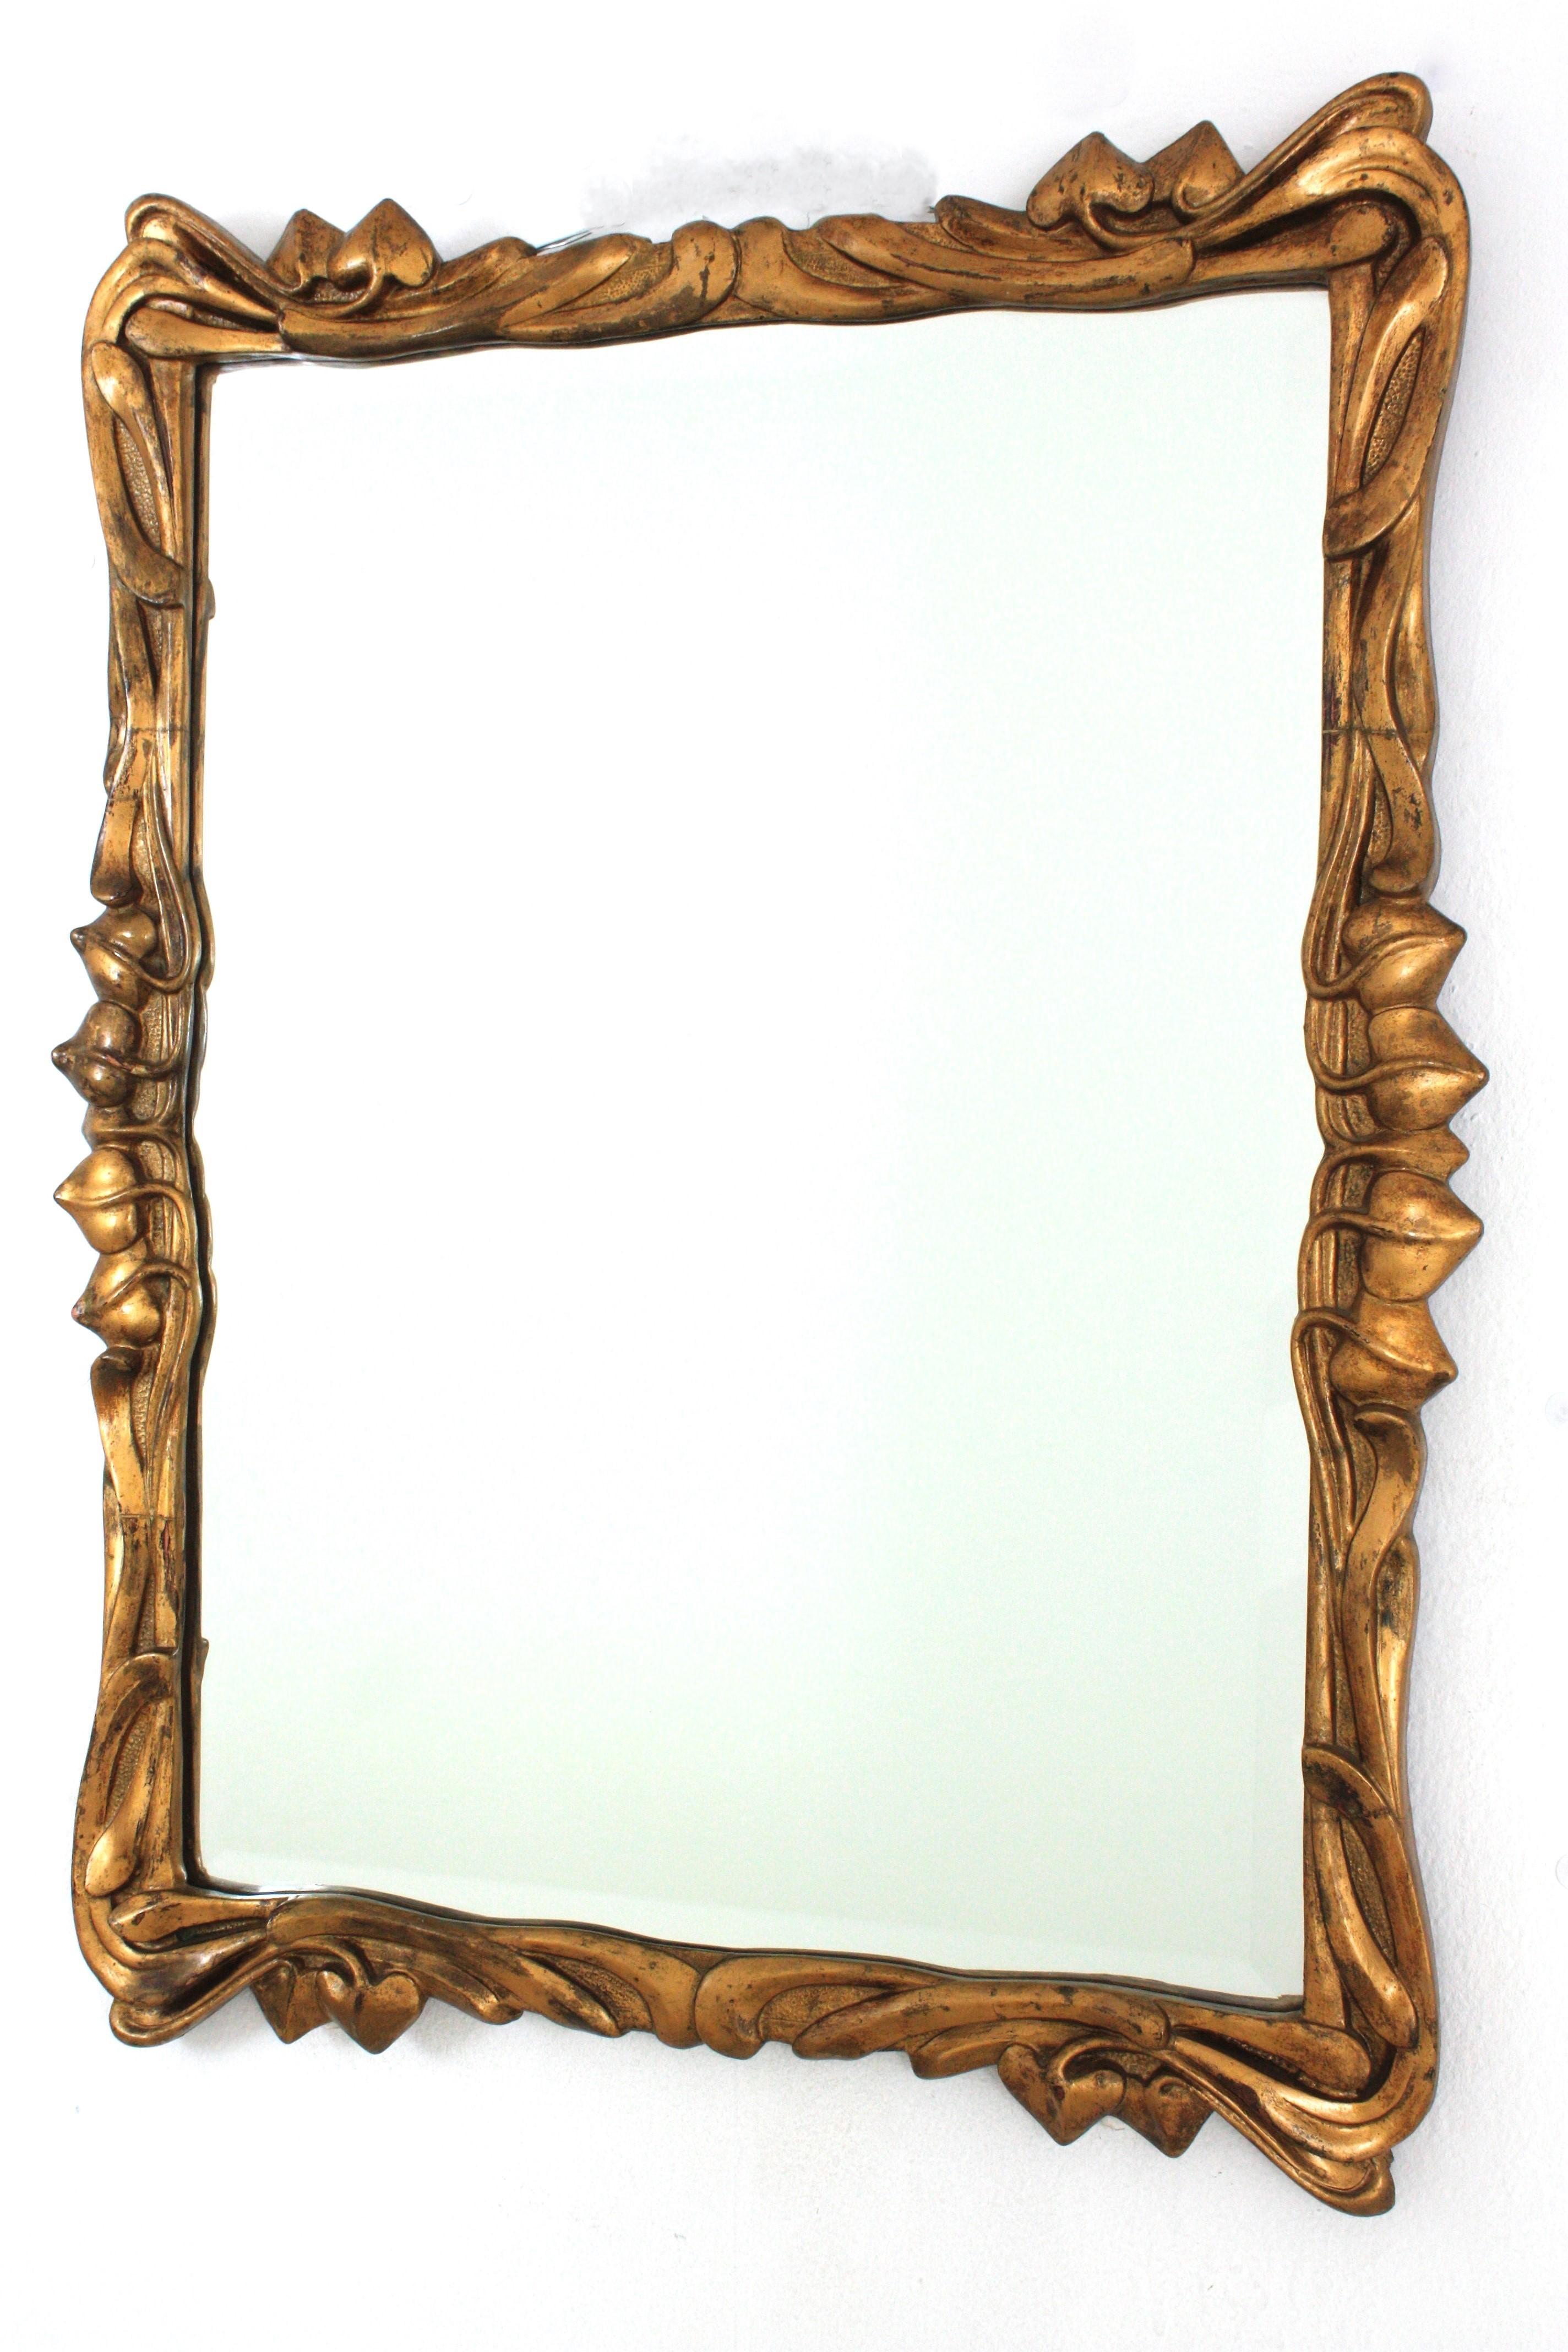 Spanish Art Nouveau Wall Mirror in Giltwood In Good Condition For Sale In Barcelona, ES